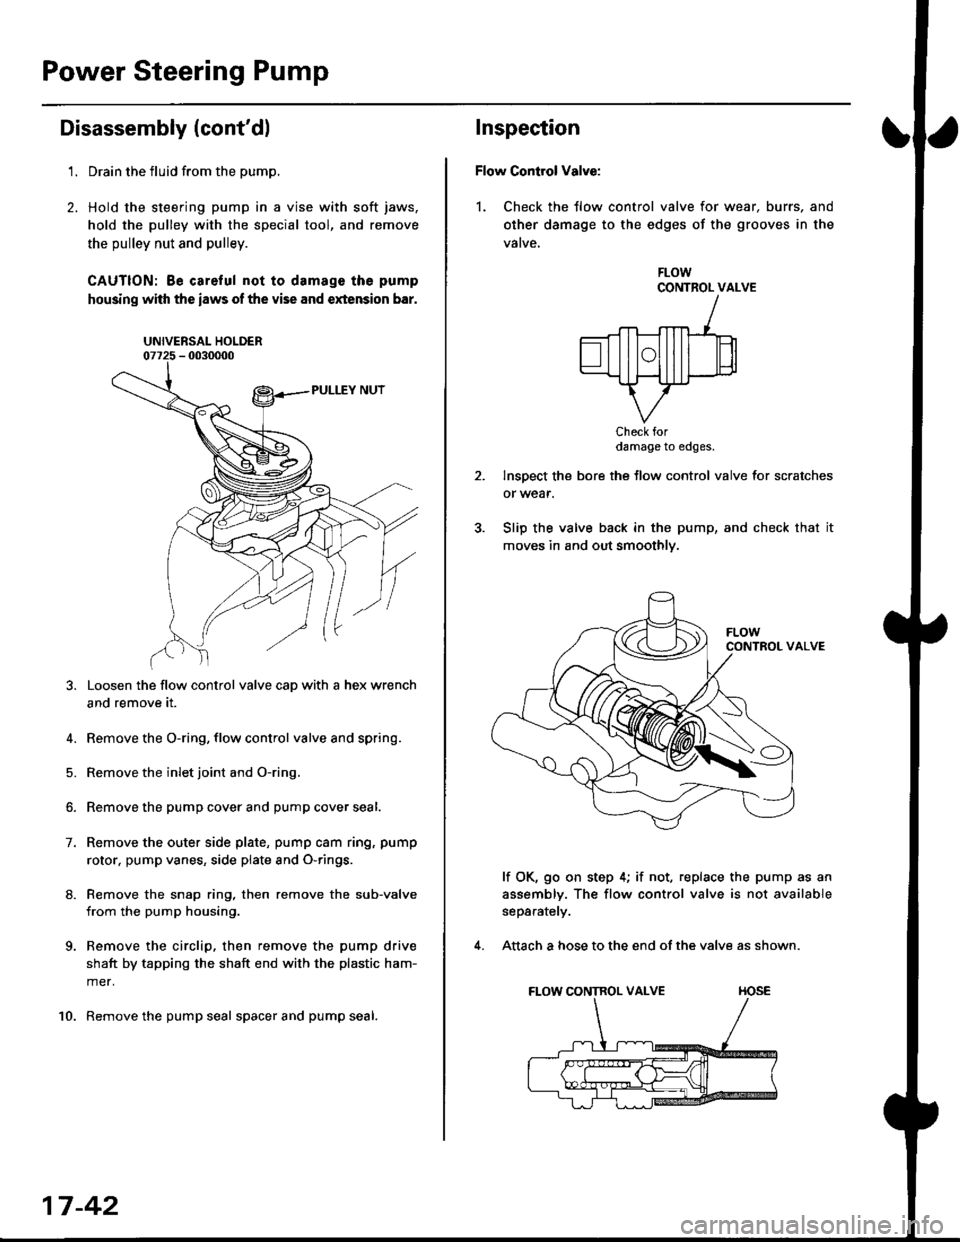 HONDA CIVIC 1996 6.G Workshop Manual Power Steering Pump
Disassembly (contdl
2.
t.Drain the fluid from the pump.
Hold the steering pump in a vise with soft jaws,
hold the pulley with the special tool, and remove
the pulley nut and pull